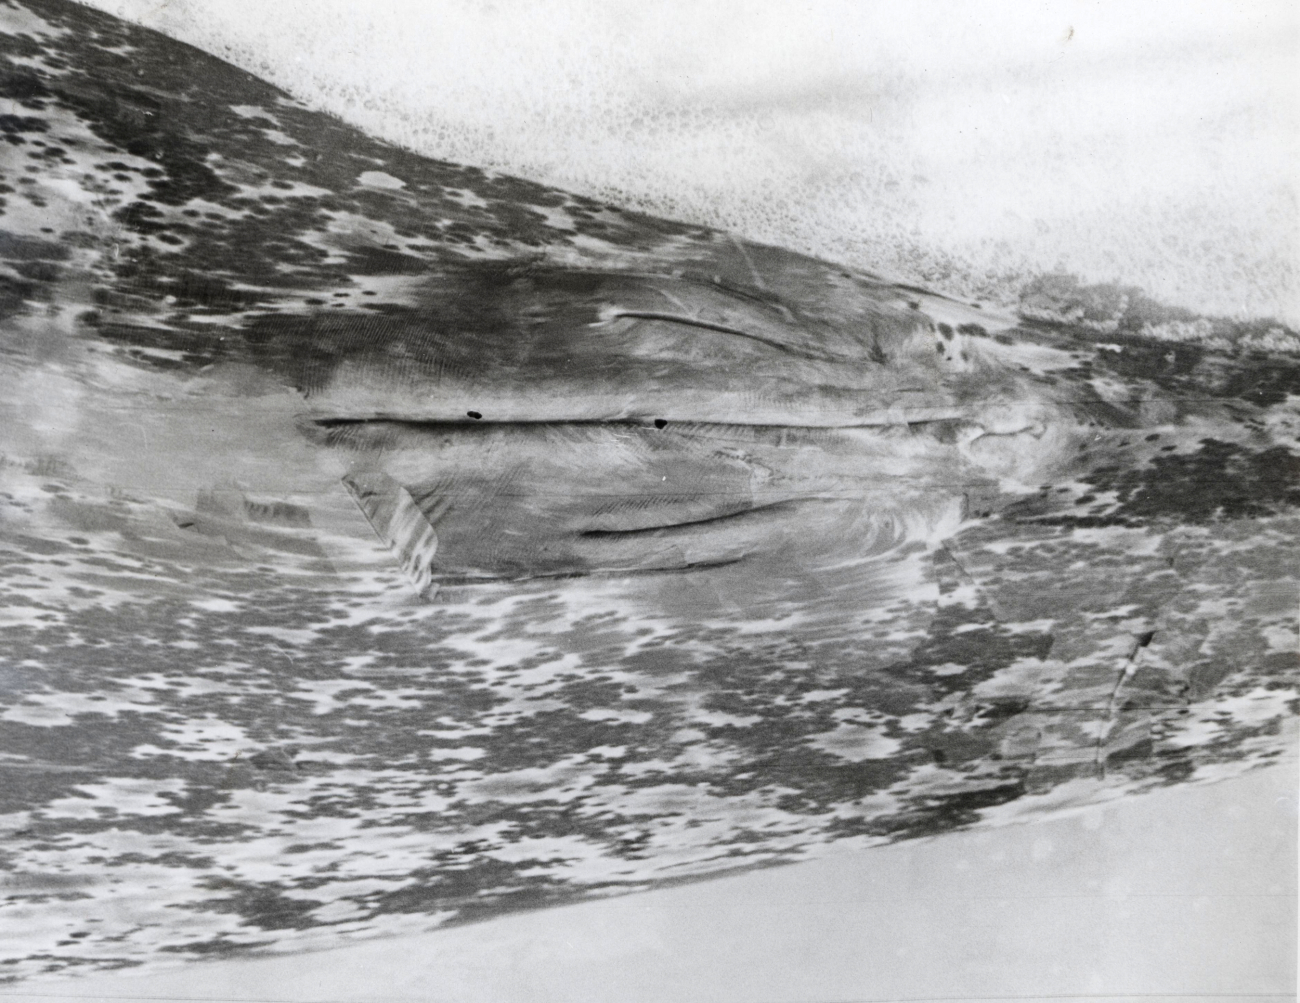 Genital area of gray whale showing mammary grooves typical of the female